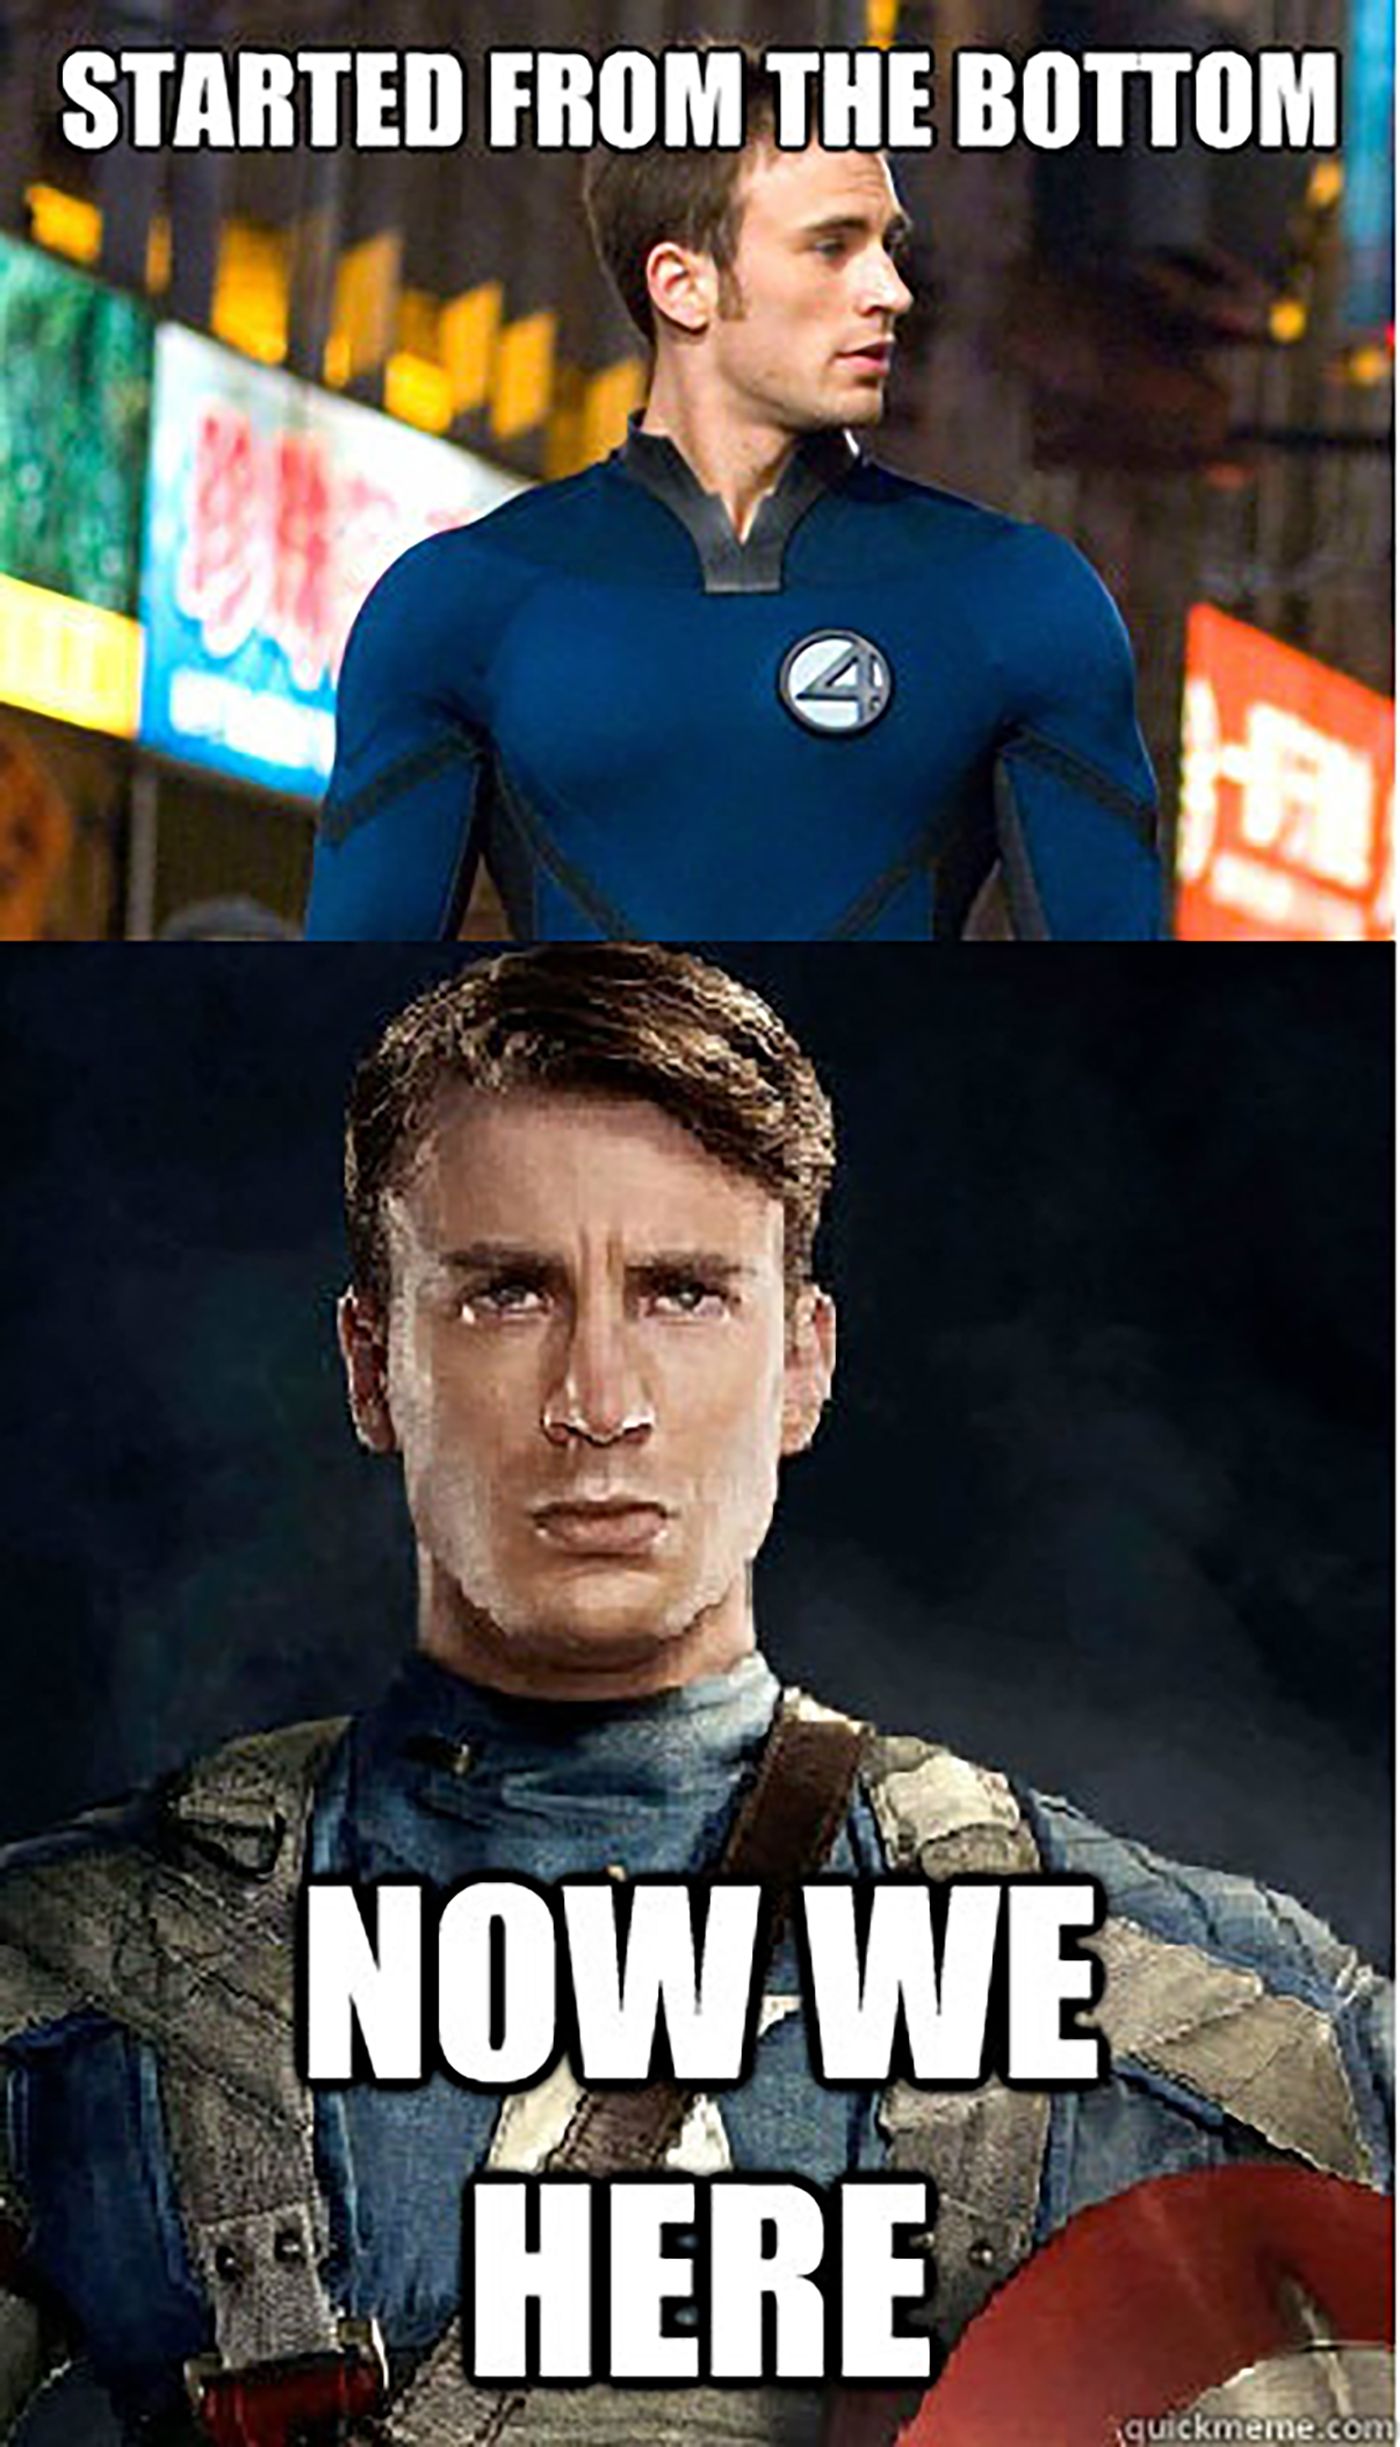 Chris Evans Started at the Bottom